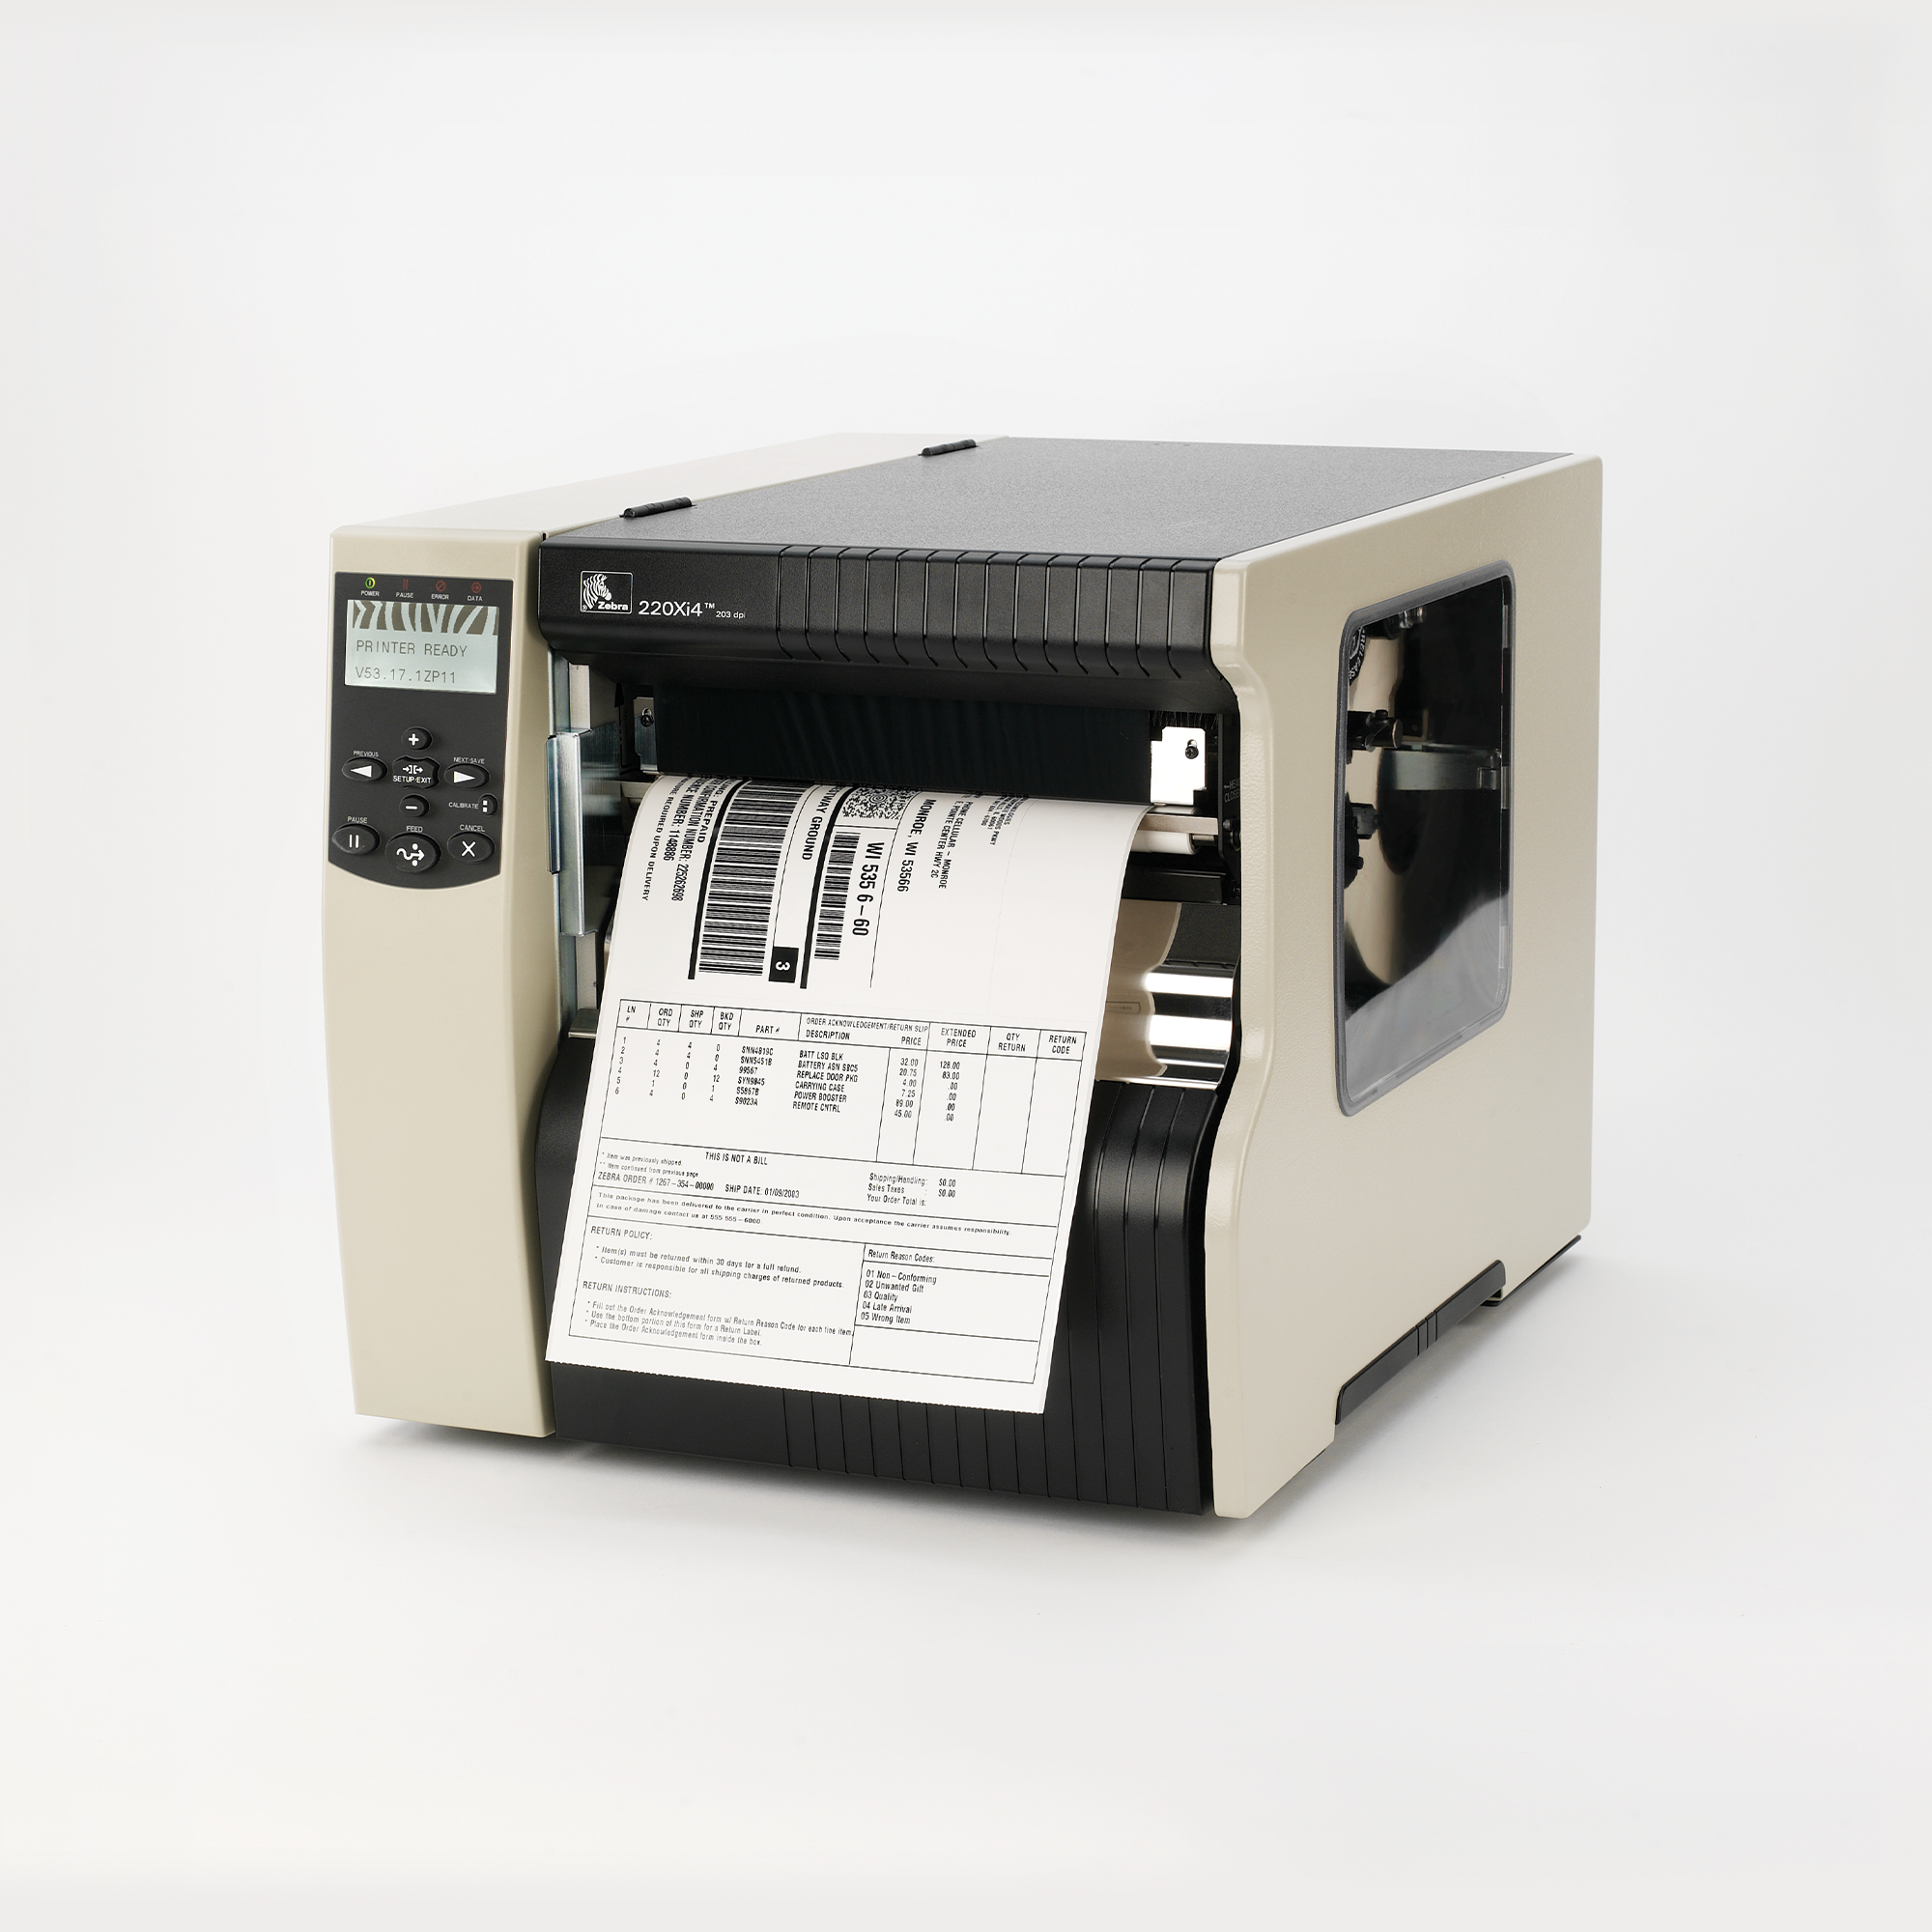 Zebra 220Xi4 Thermal Transfer Printer - 203dpi, US Cord, Serial, Parallel, USB, Int 10/100, Cutter with Catch Tray - MPN: 220-801-00100